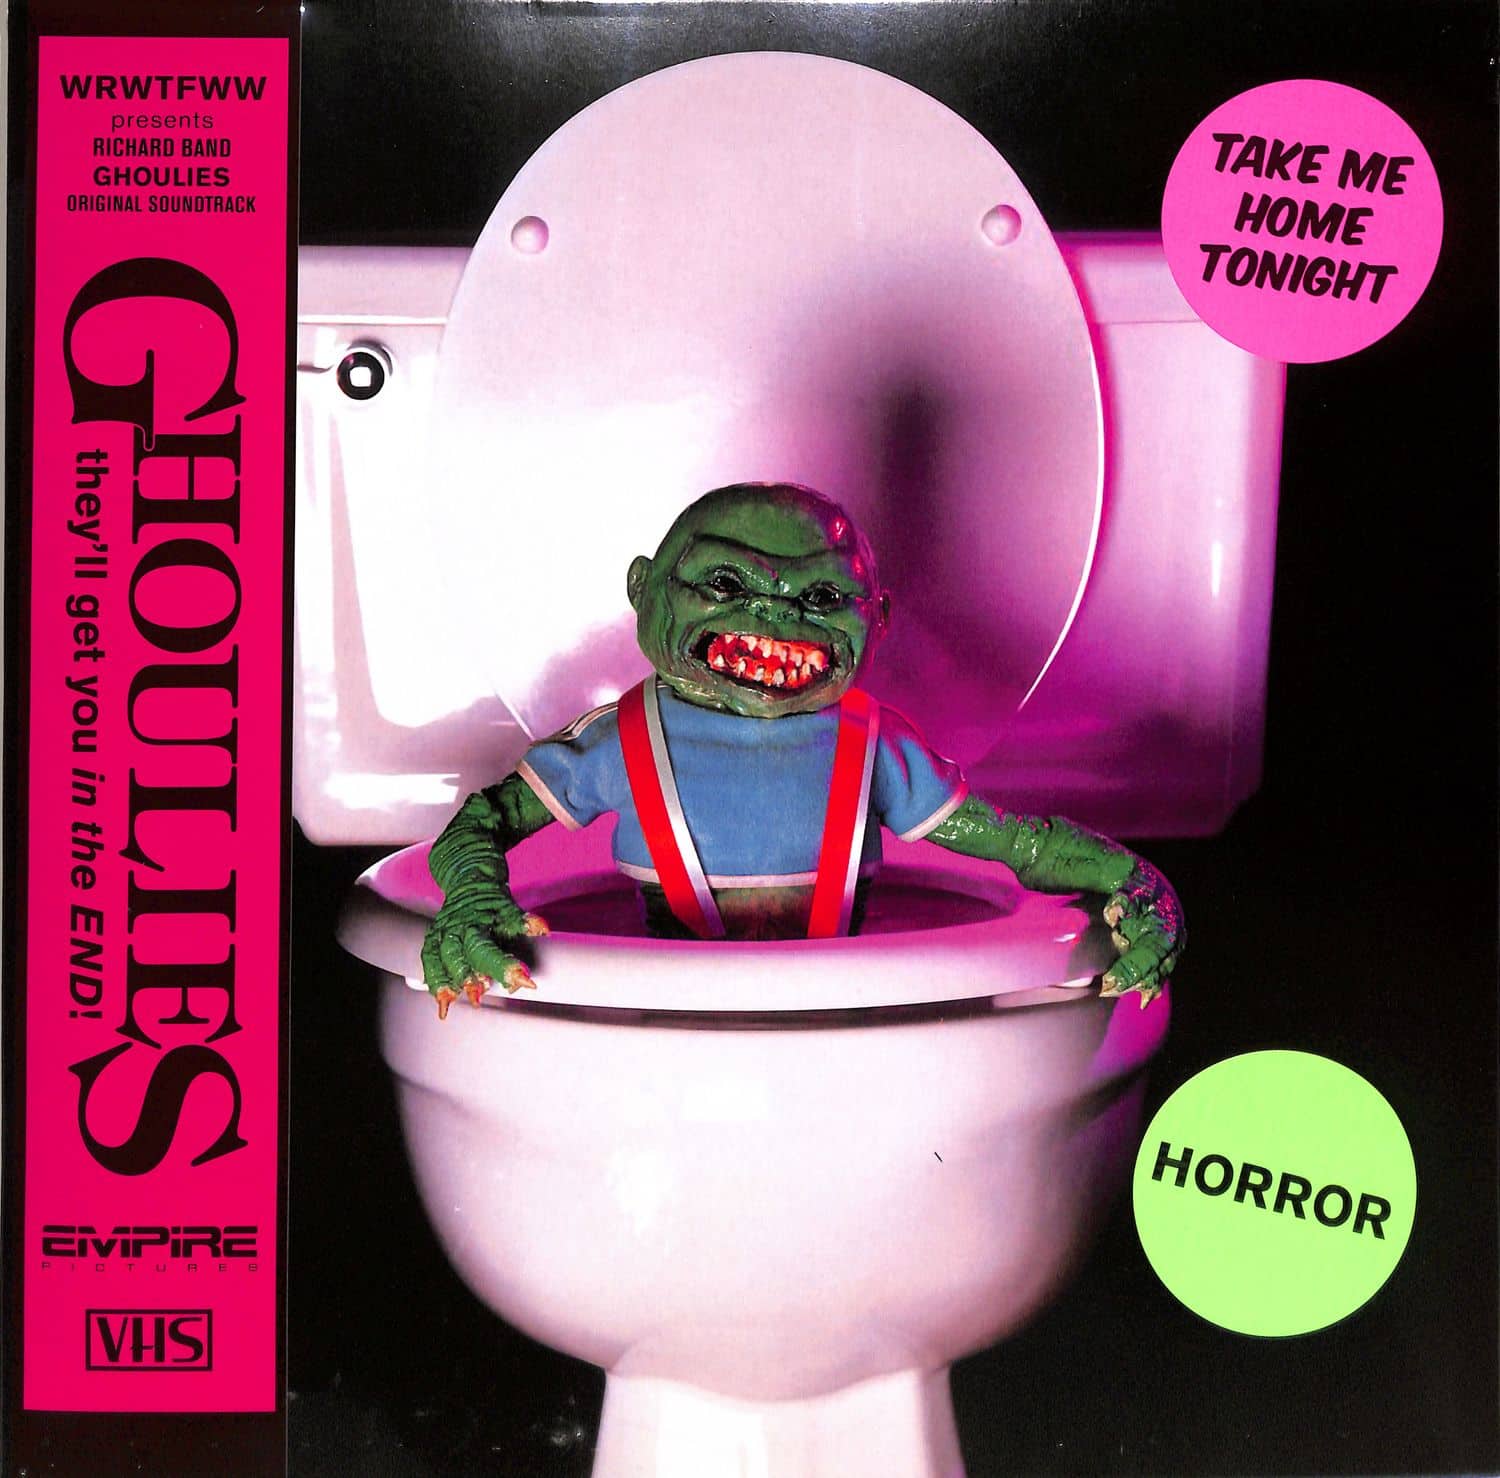 Richard Band - GHOULIES O.S.T. 